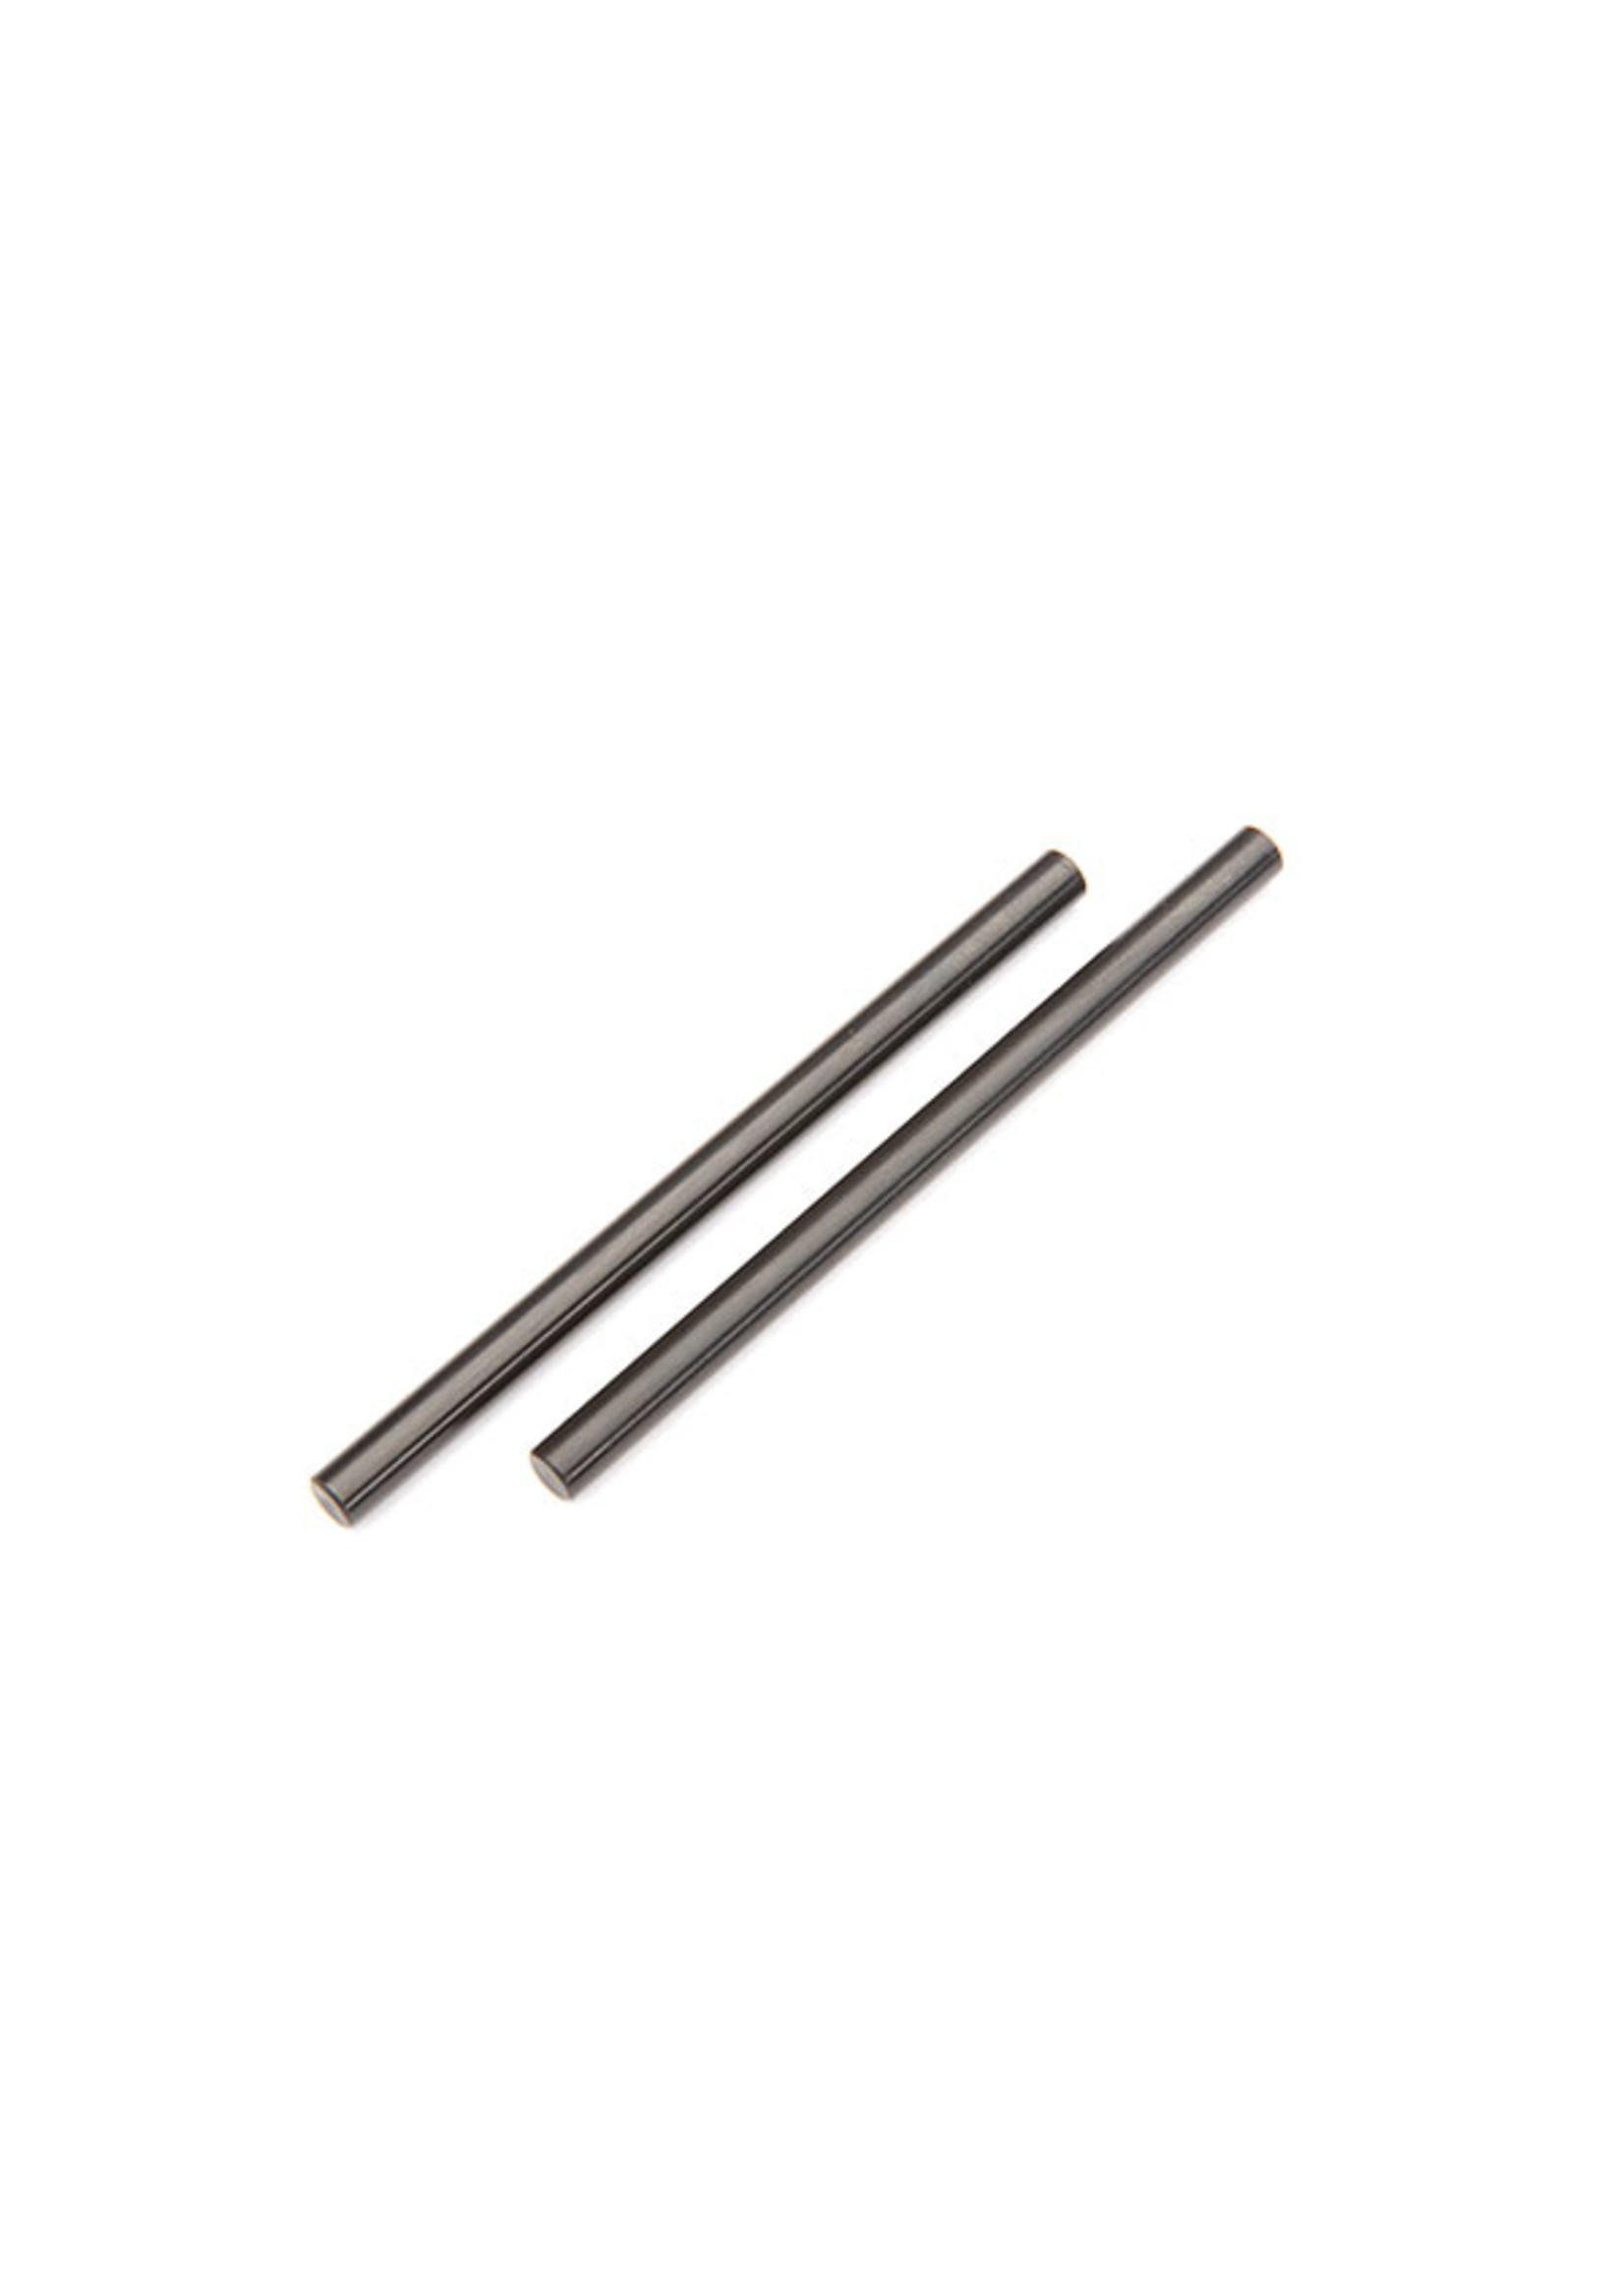 Traxxas 8941 - Lower Inner Suspension Pins for Maxx